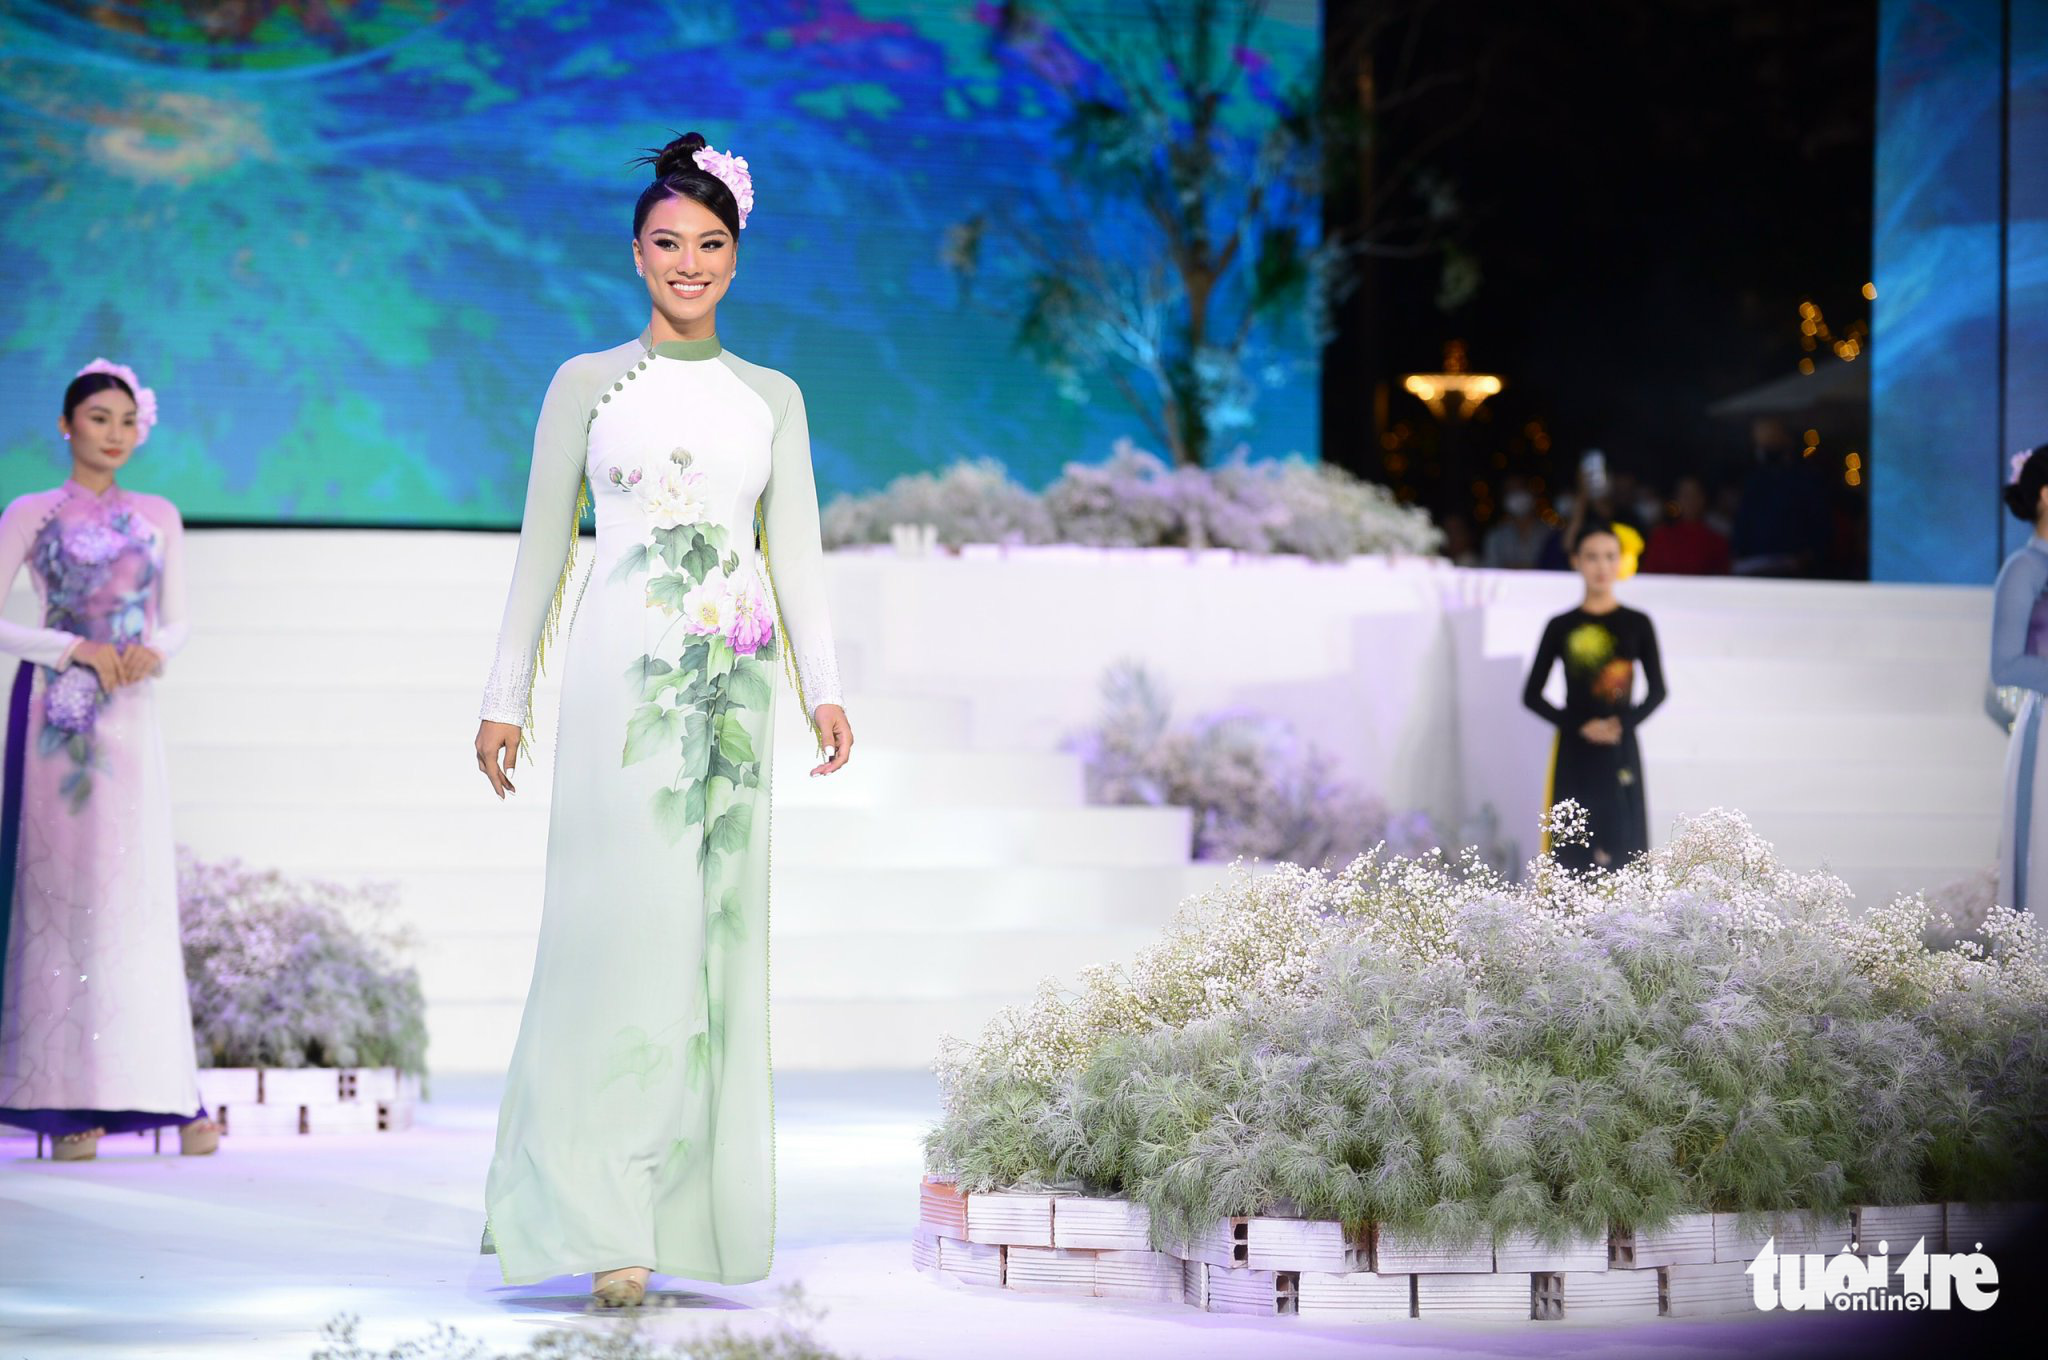 Nguyen Huynh Kim Duyen, runner-up of Miss Universe Vietnam 2019, during the opening ceremony of the Ho Chi Minh City Ao Dai Festival, March 5, 2022. Photo: Quang Dinh / Tuoi Tre